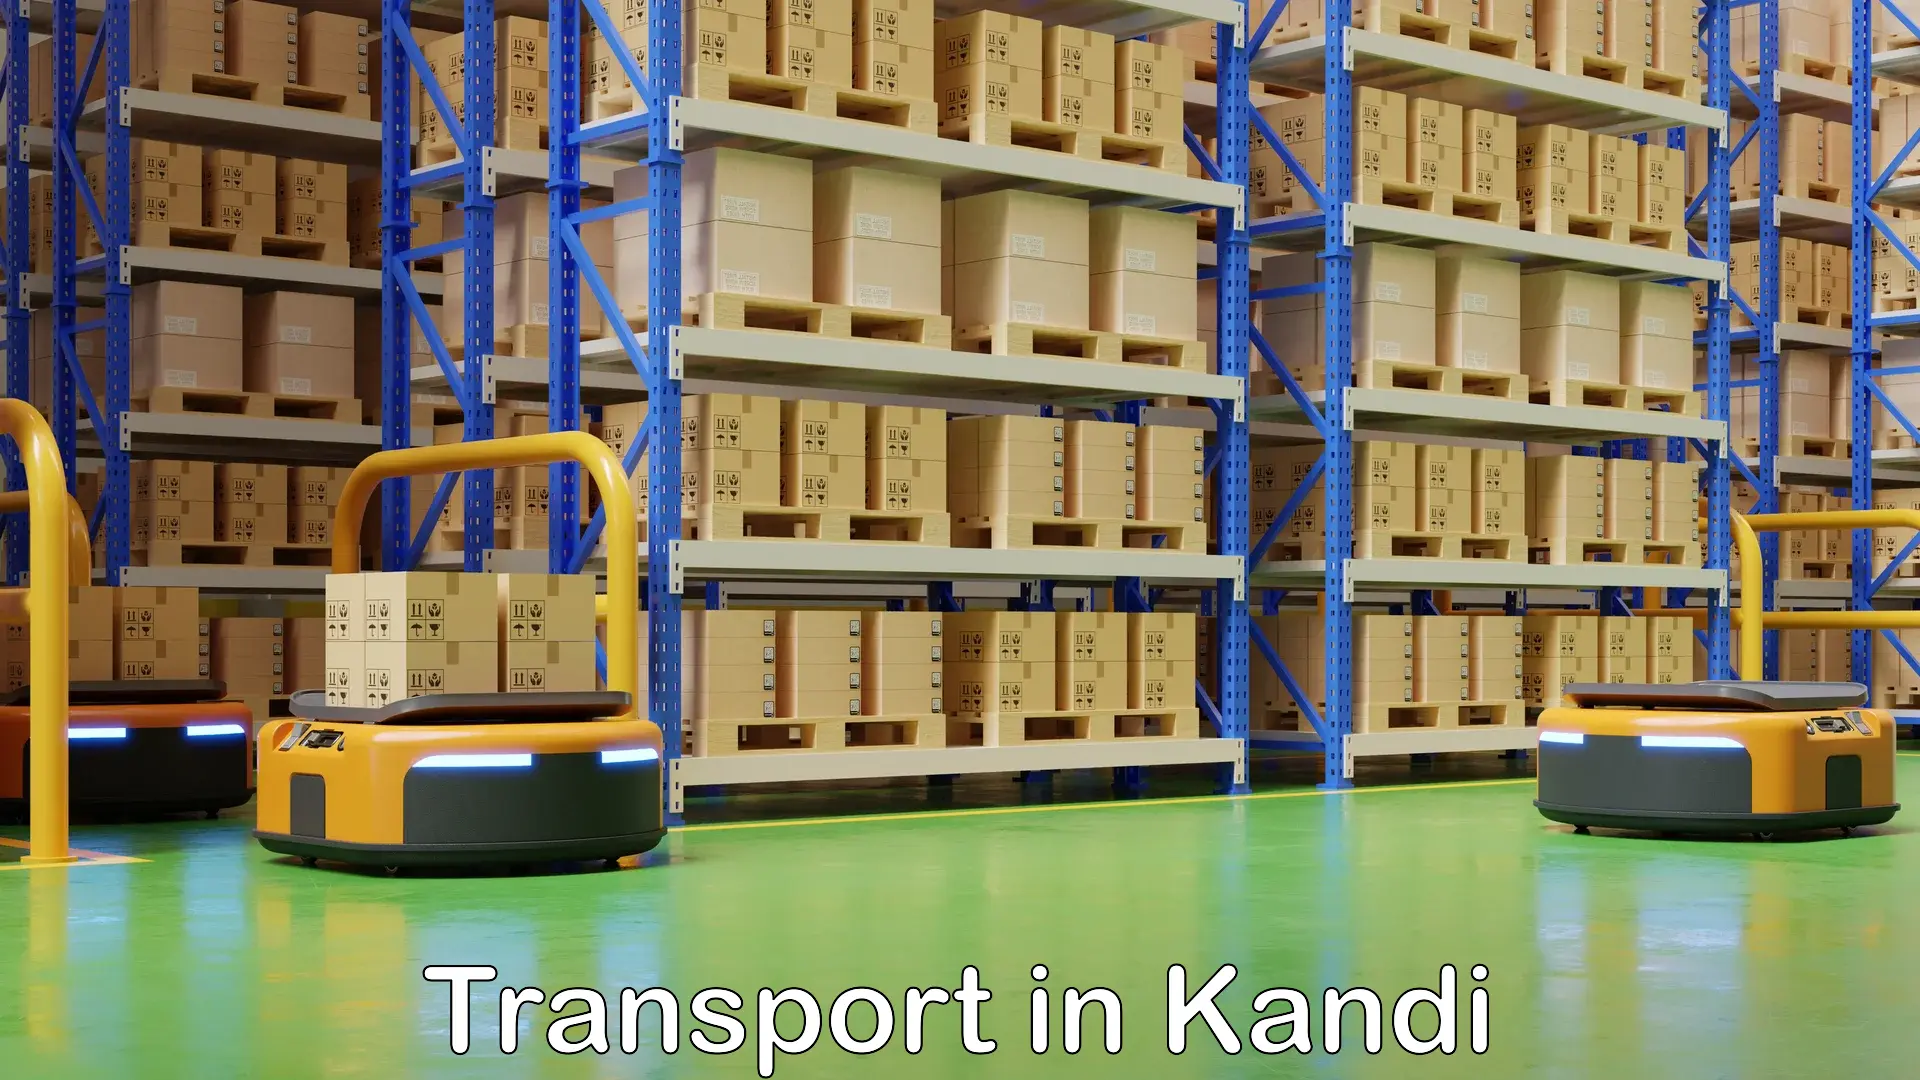 Transport shared services in Kandi